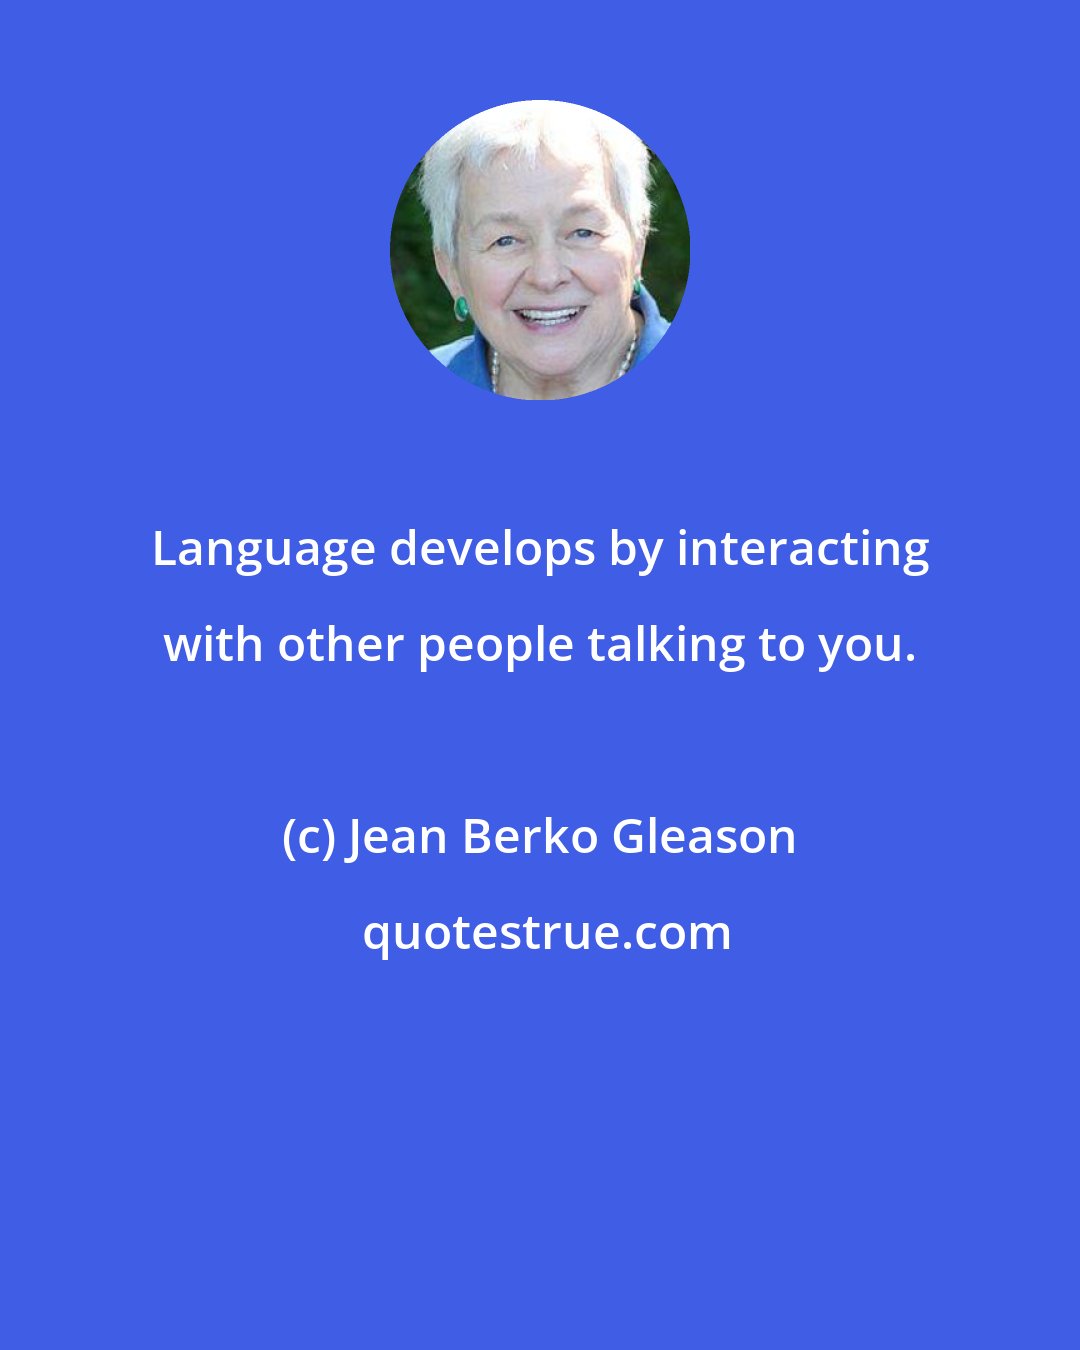 Jean Berko Gleason: Language develops by interacting with other people talking to you.